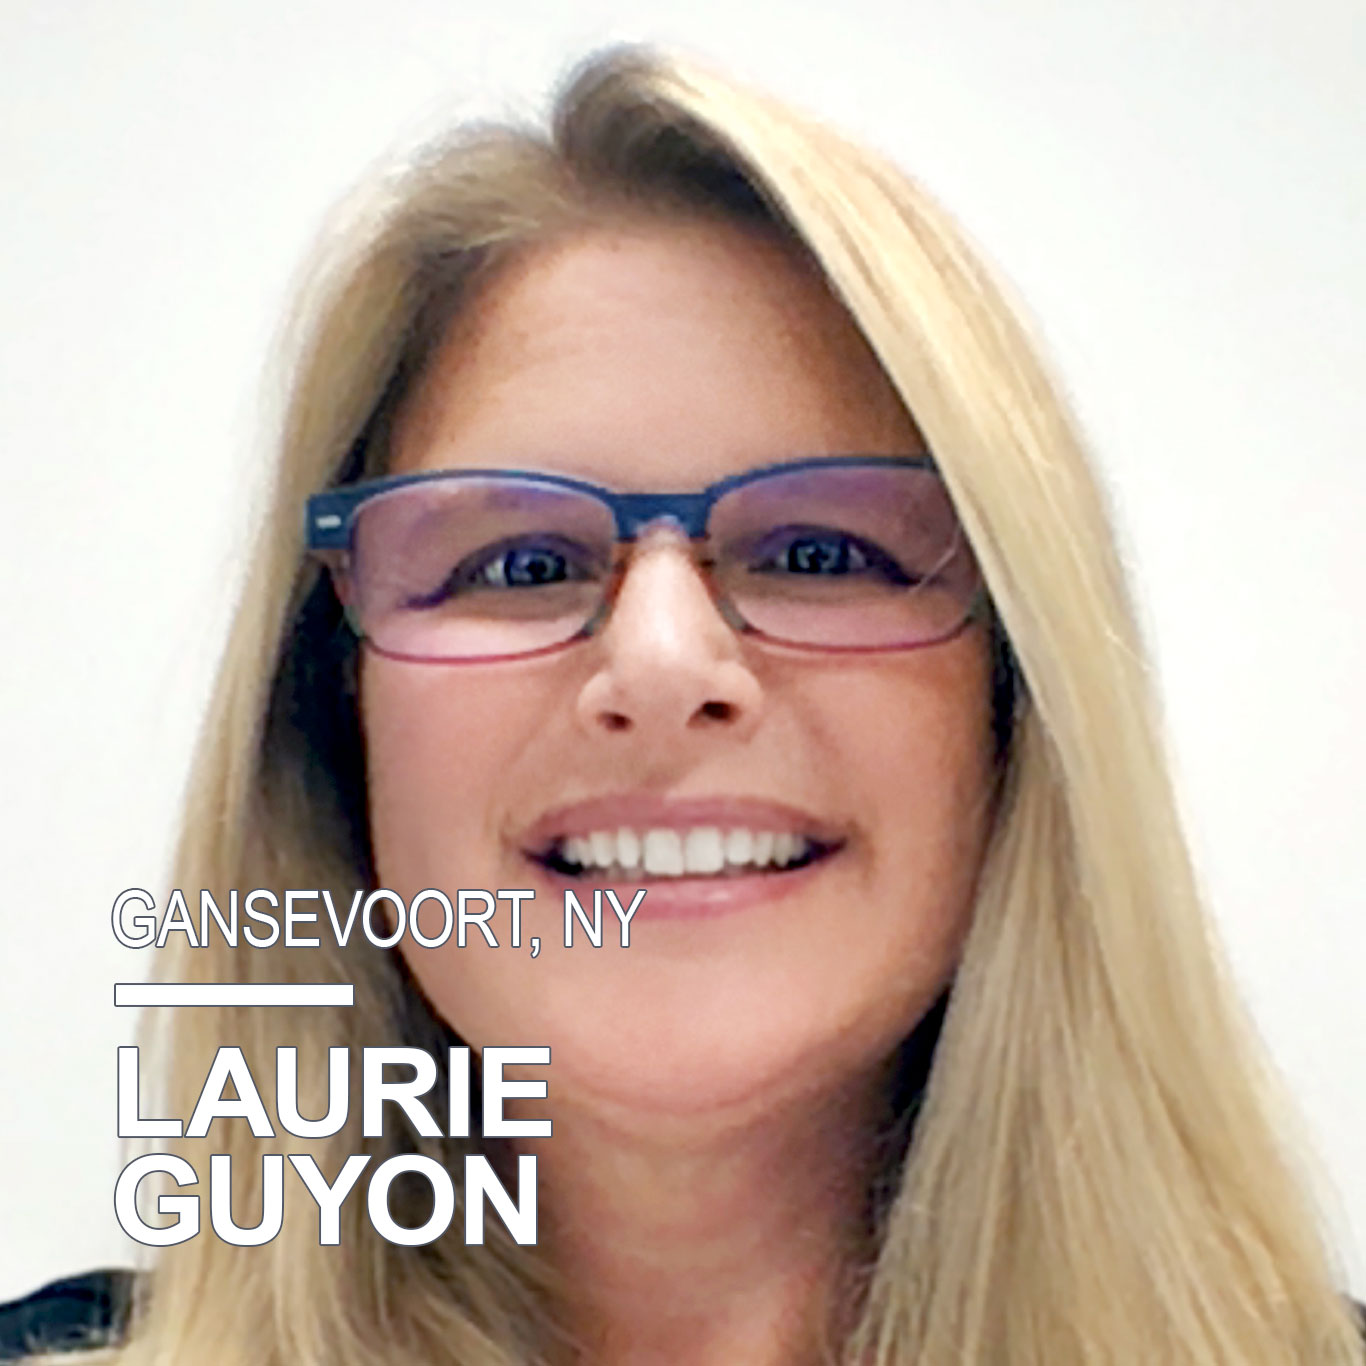 Laurie Guyon is a coordinator for the Model Schools Program at Washington-Saratoga-Warren-Hamilton-Essex (WSWHE) Board of Cooperative (BOCES) in Gansevoort, NY. She has a bachelor’s in Science, Speech, and Hearing and a master’s in Science in Teaching. In 2021, she was named a National Geographic Certified Educator, and, in 2022, she won Best Overall Implementation of Technology, Tech, and Learning. Laurie’s passions include computer science, digital literacy, and EdTech integration. She loves that every day at her job is totally different.